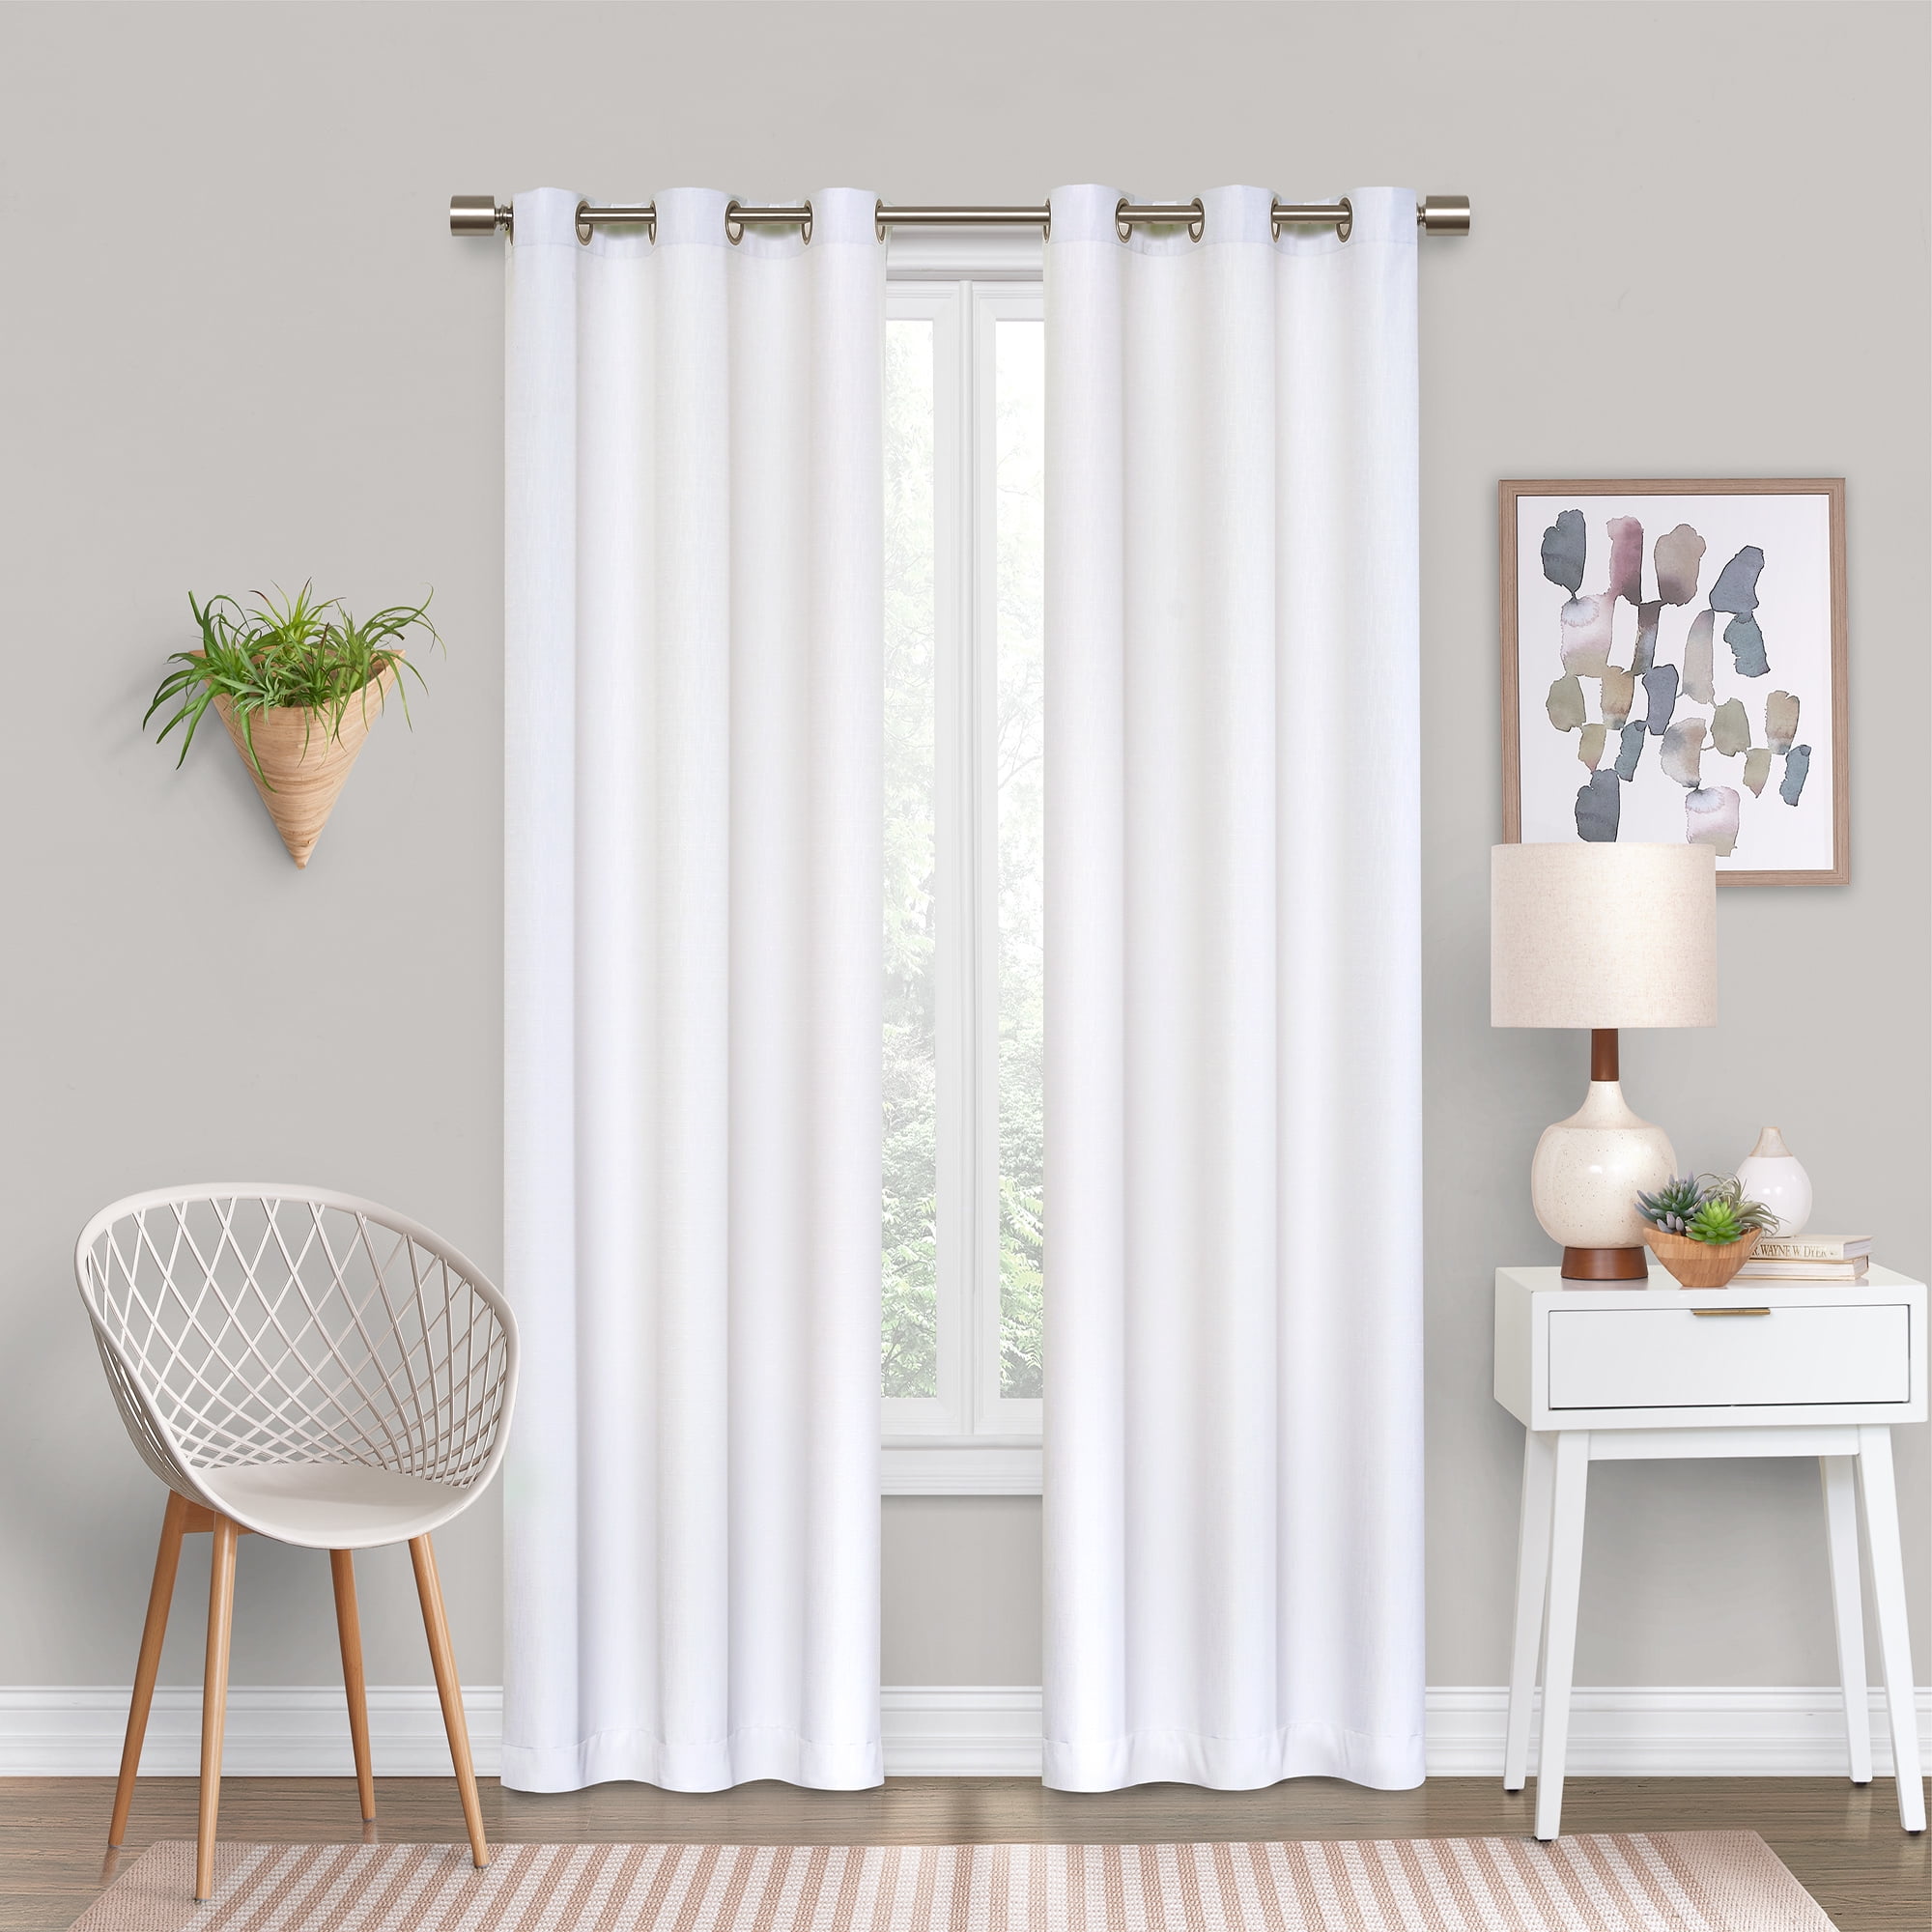 Eclipse Thermaback Blackout Window Curtain Panels 42 x 63 one panel 